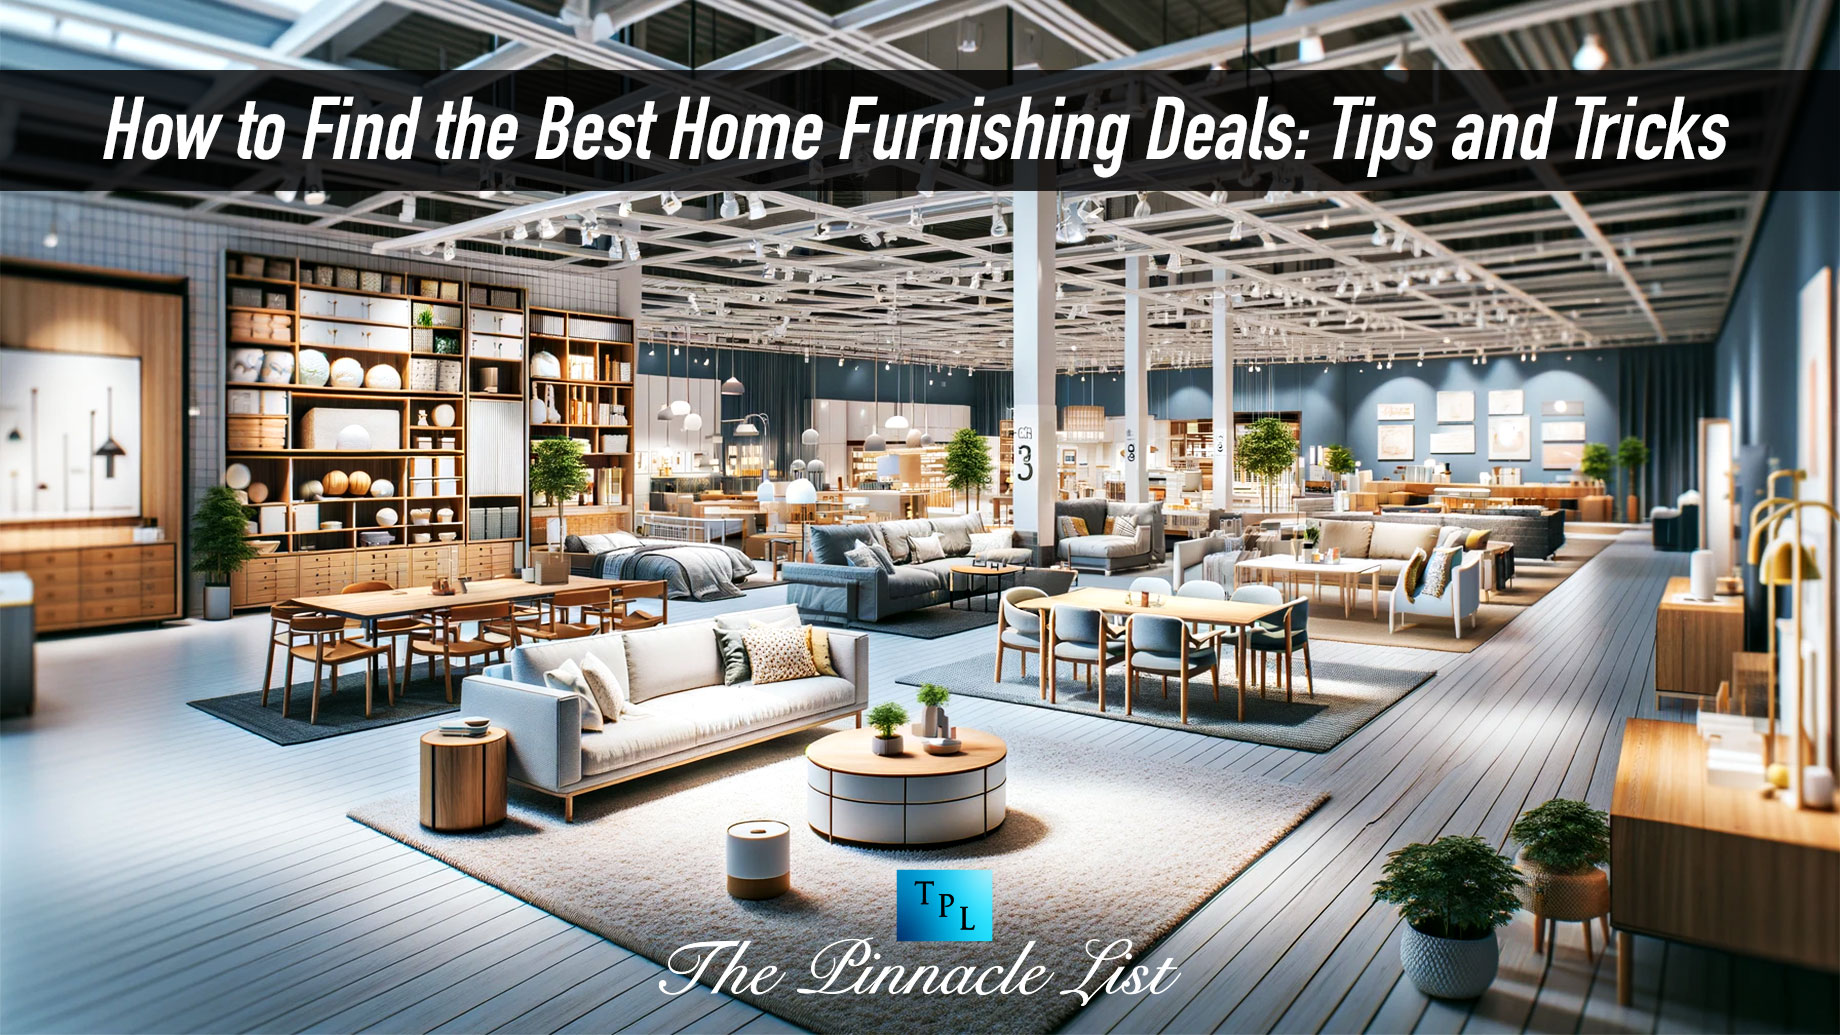 How to Find the Best Home Furnishing Deals: Tips and Tricks